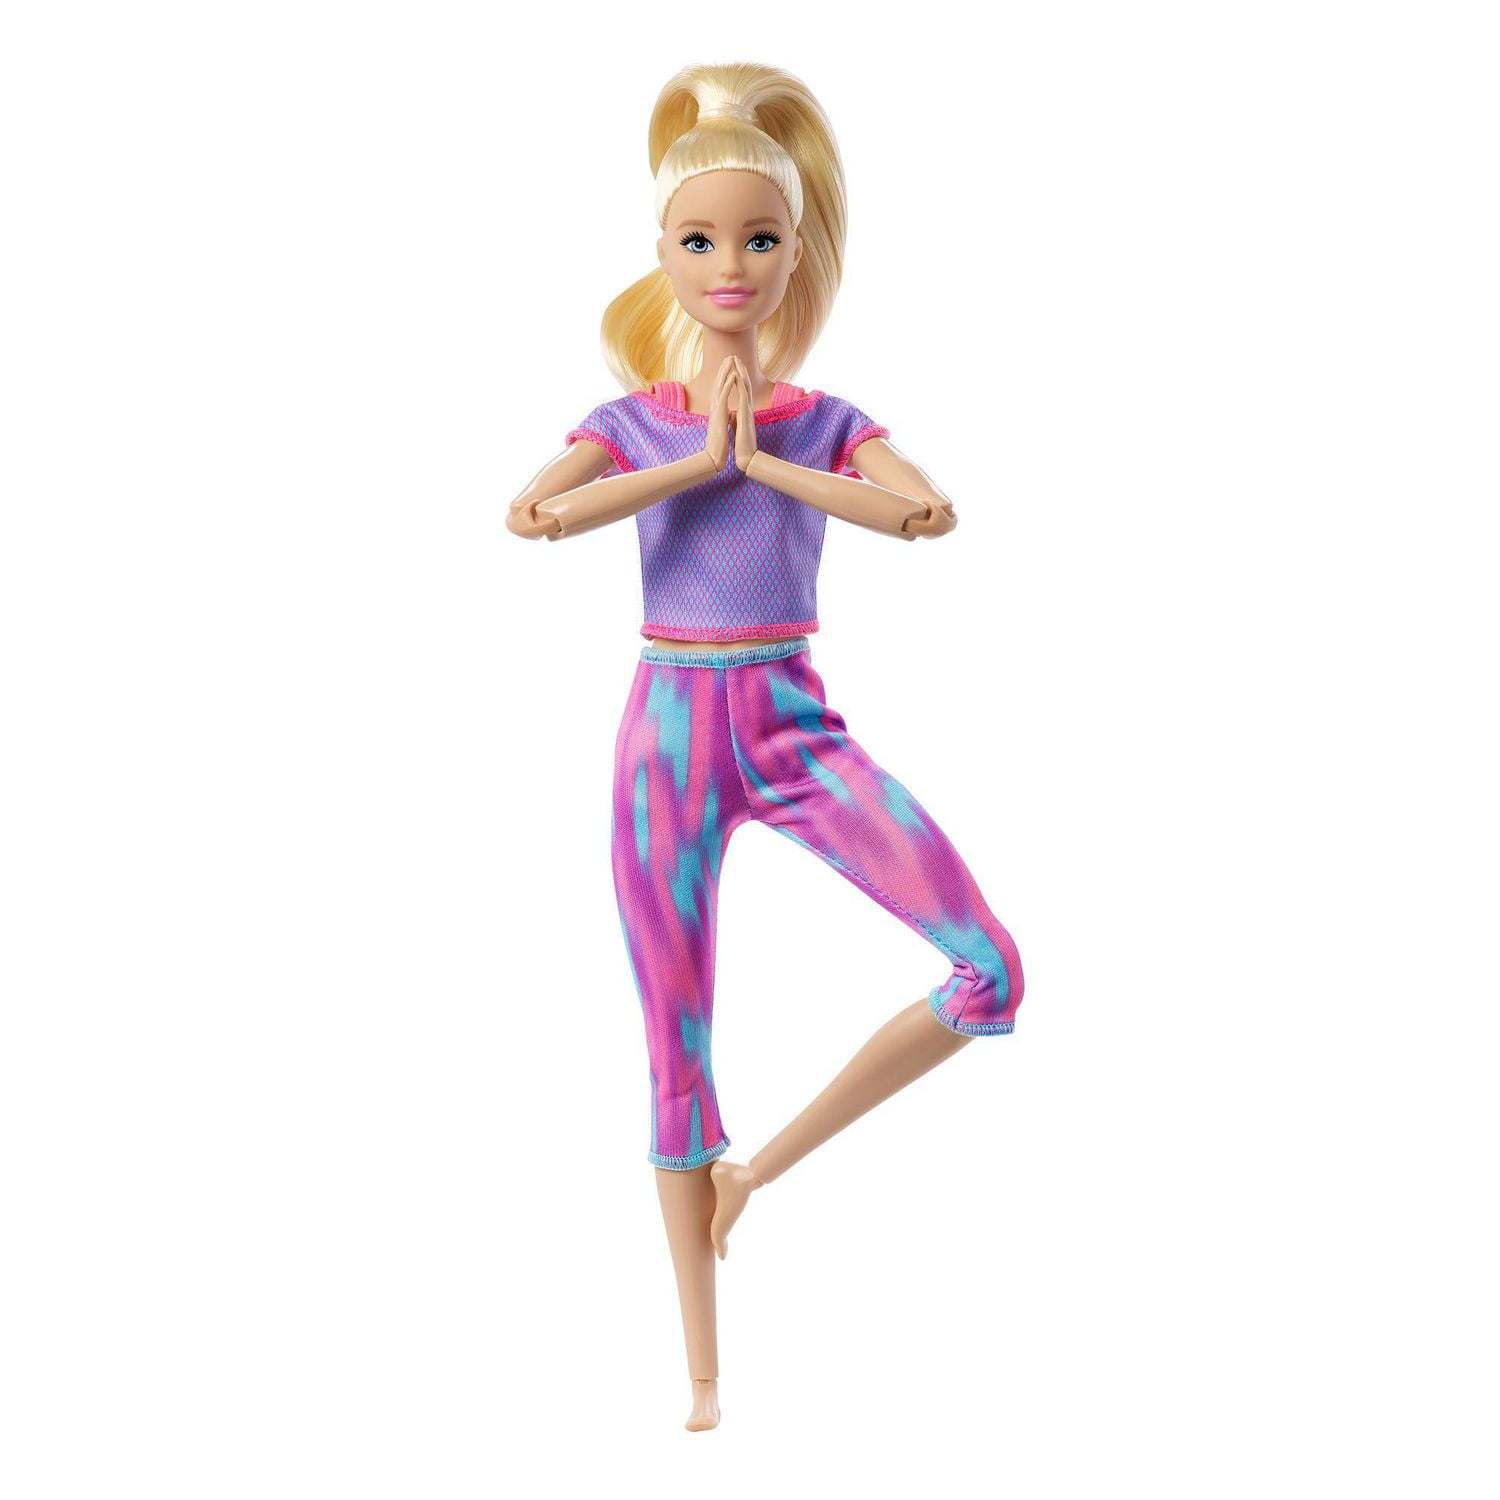 Barbie Made to Move Dolls with 22 Joints and Yoga Clothes, Dolls